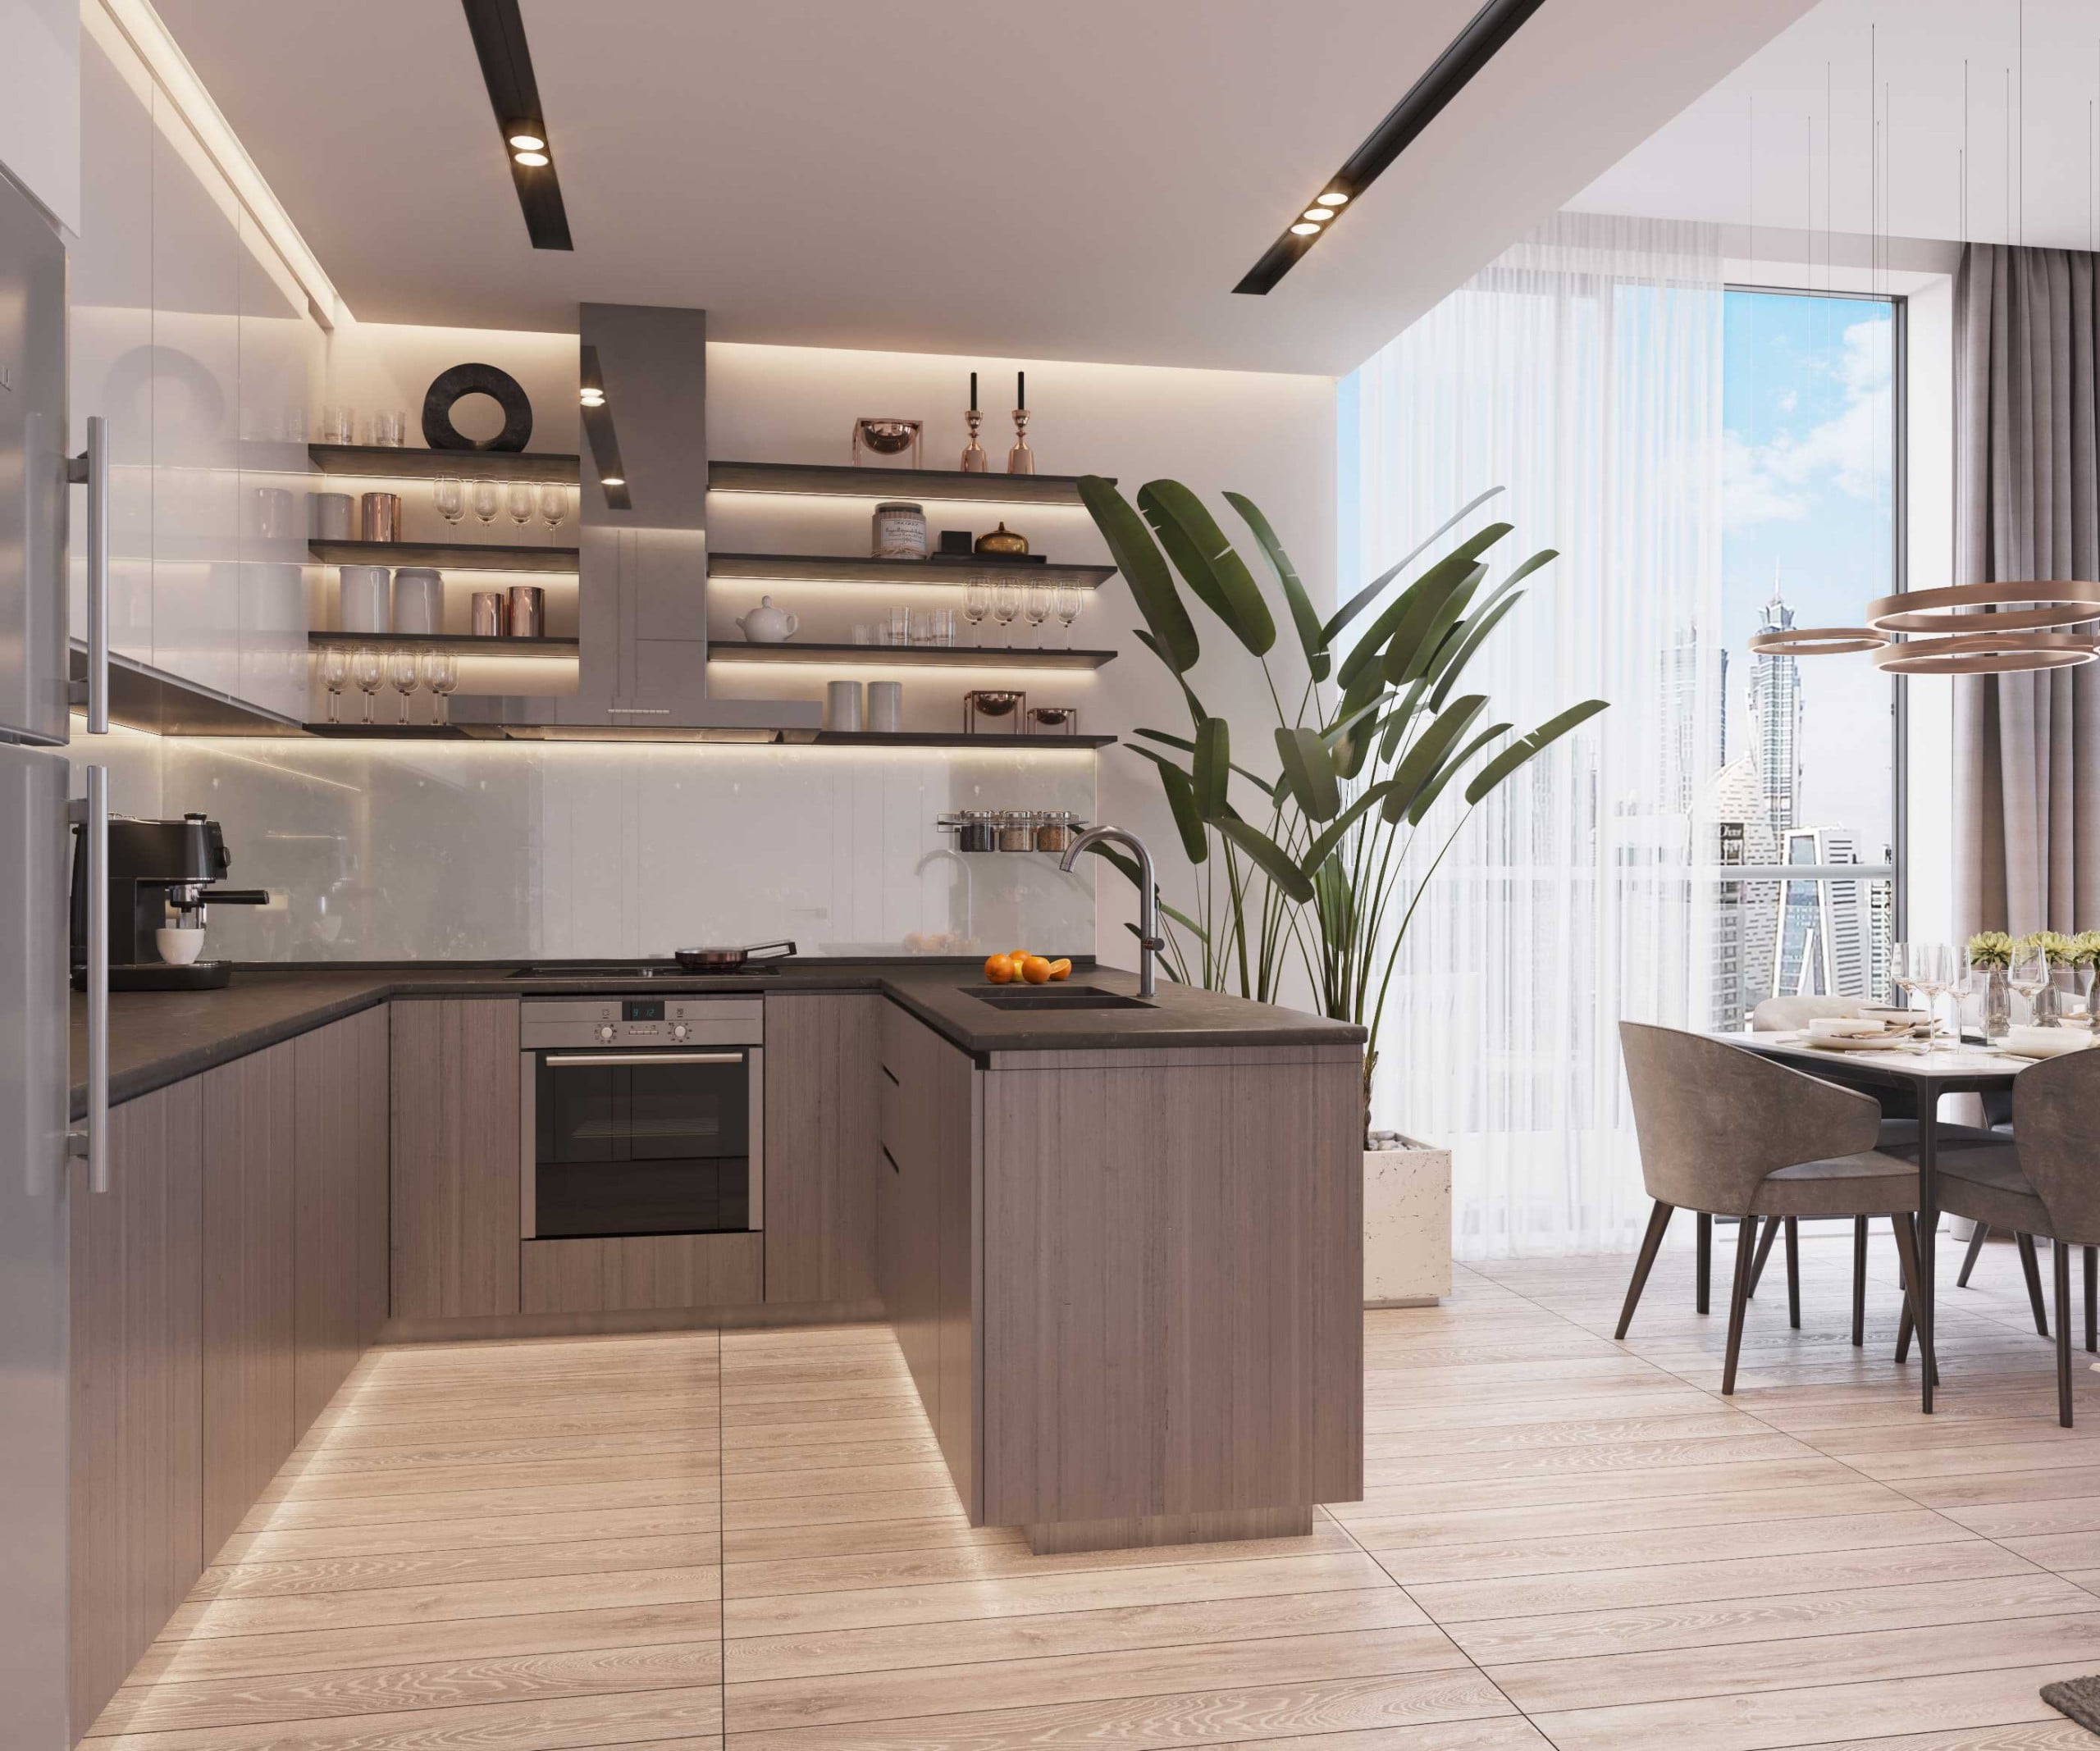 Kitchen View 2 scaled - Immobilier Dubai